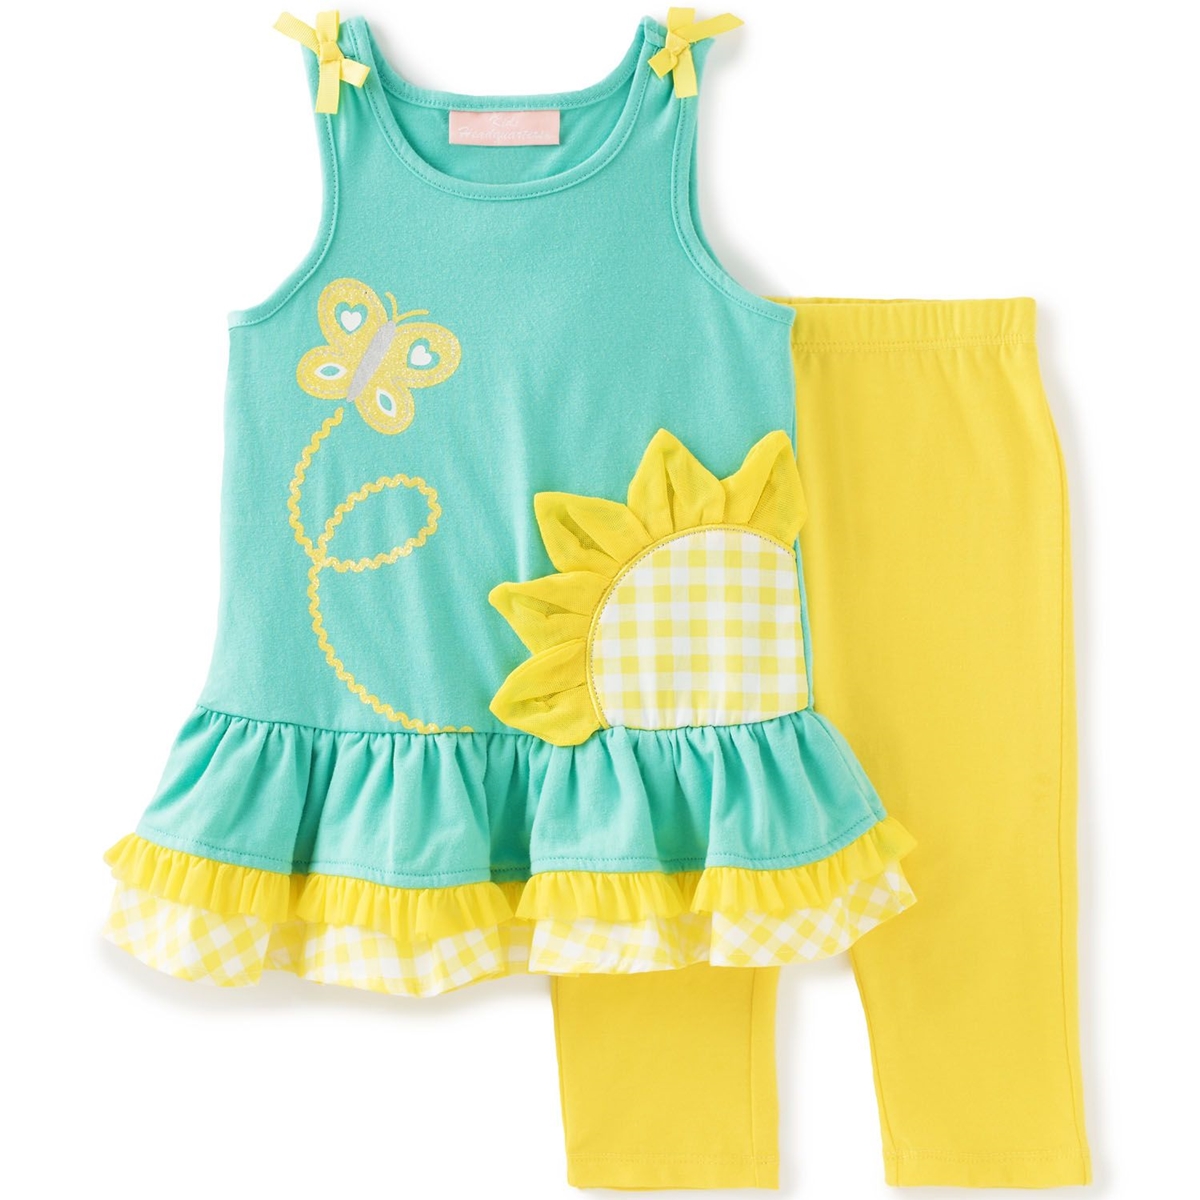 Wholesale branded baby clothes 11 May Cheap Wholesale baby clothes 